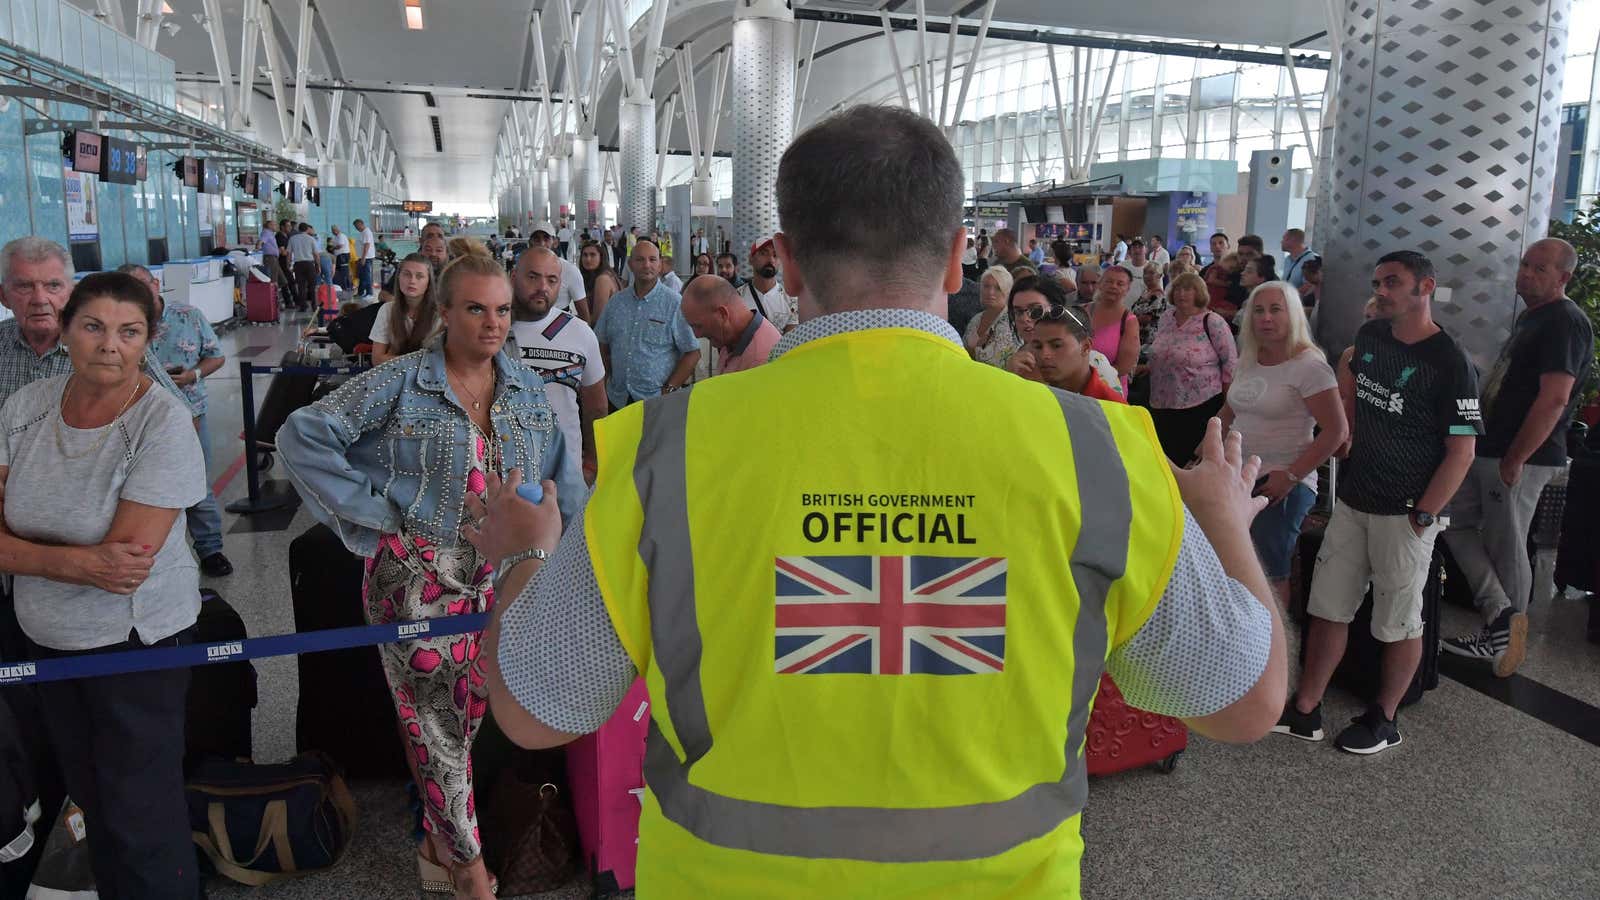 Thomas Cook’s sudden collapse has triggered the UK’s biggest repatriation since World War II to bring back thousands of stranded passengers.